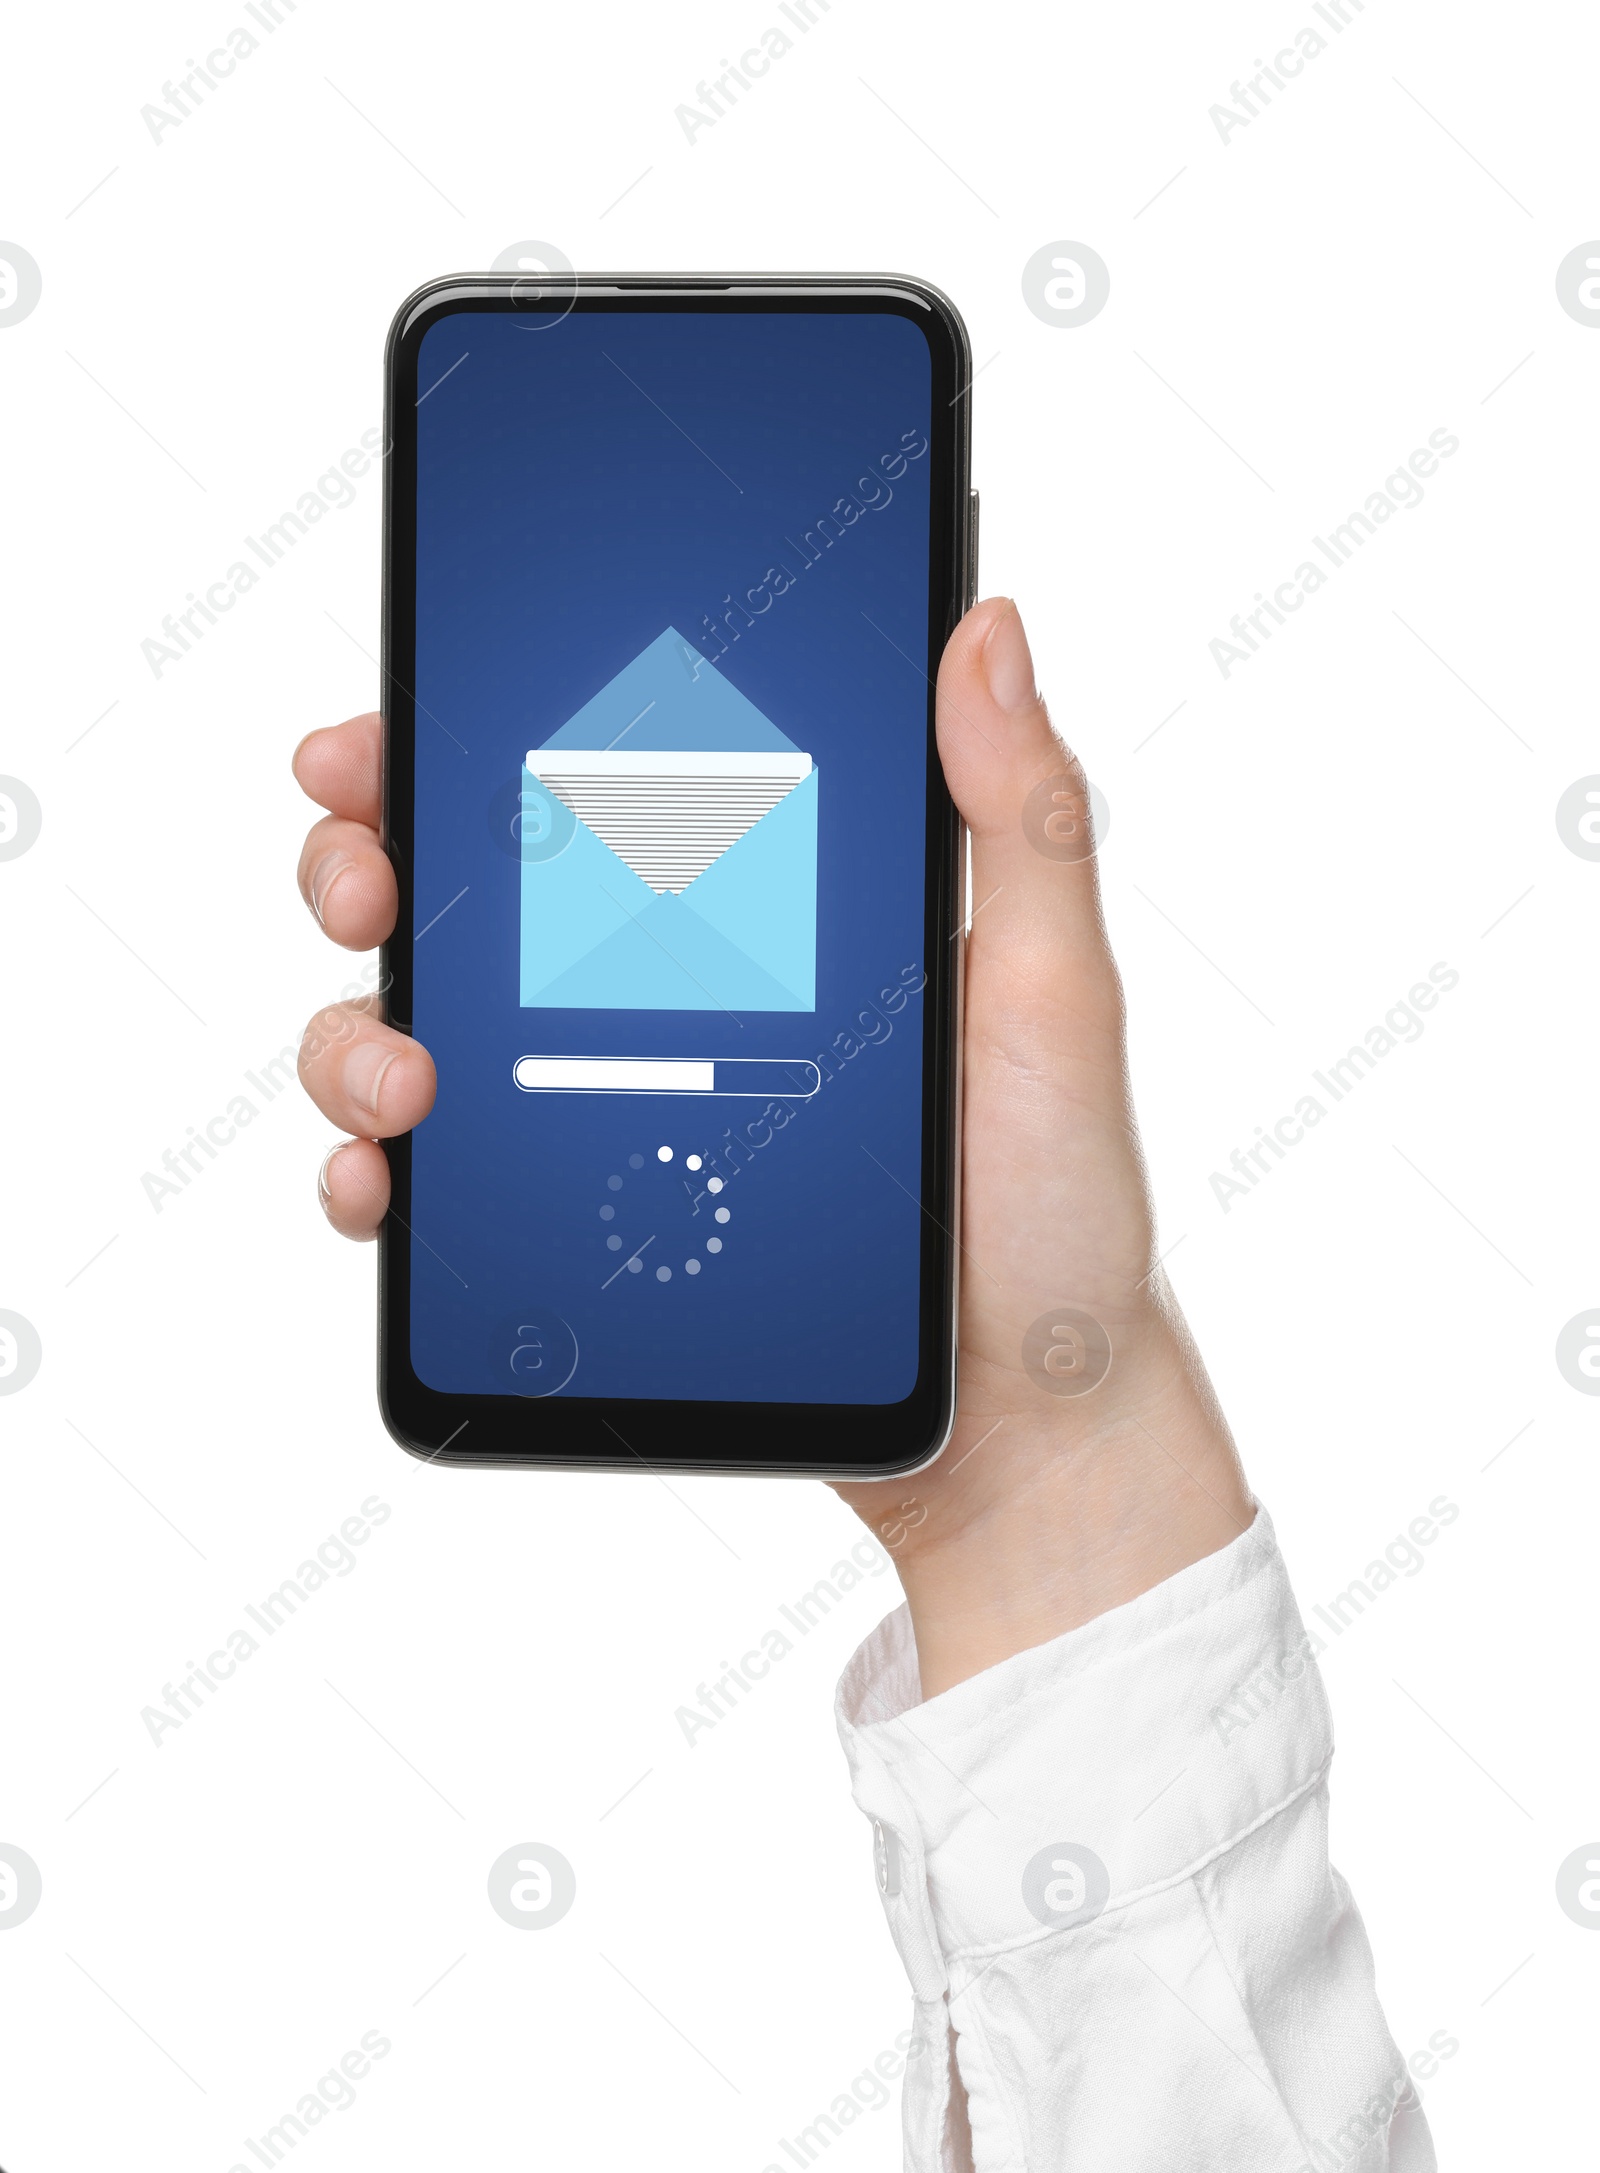 Image of Got new message. Woman holding smartphone on white background, closeup